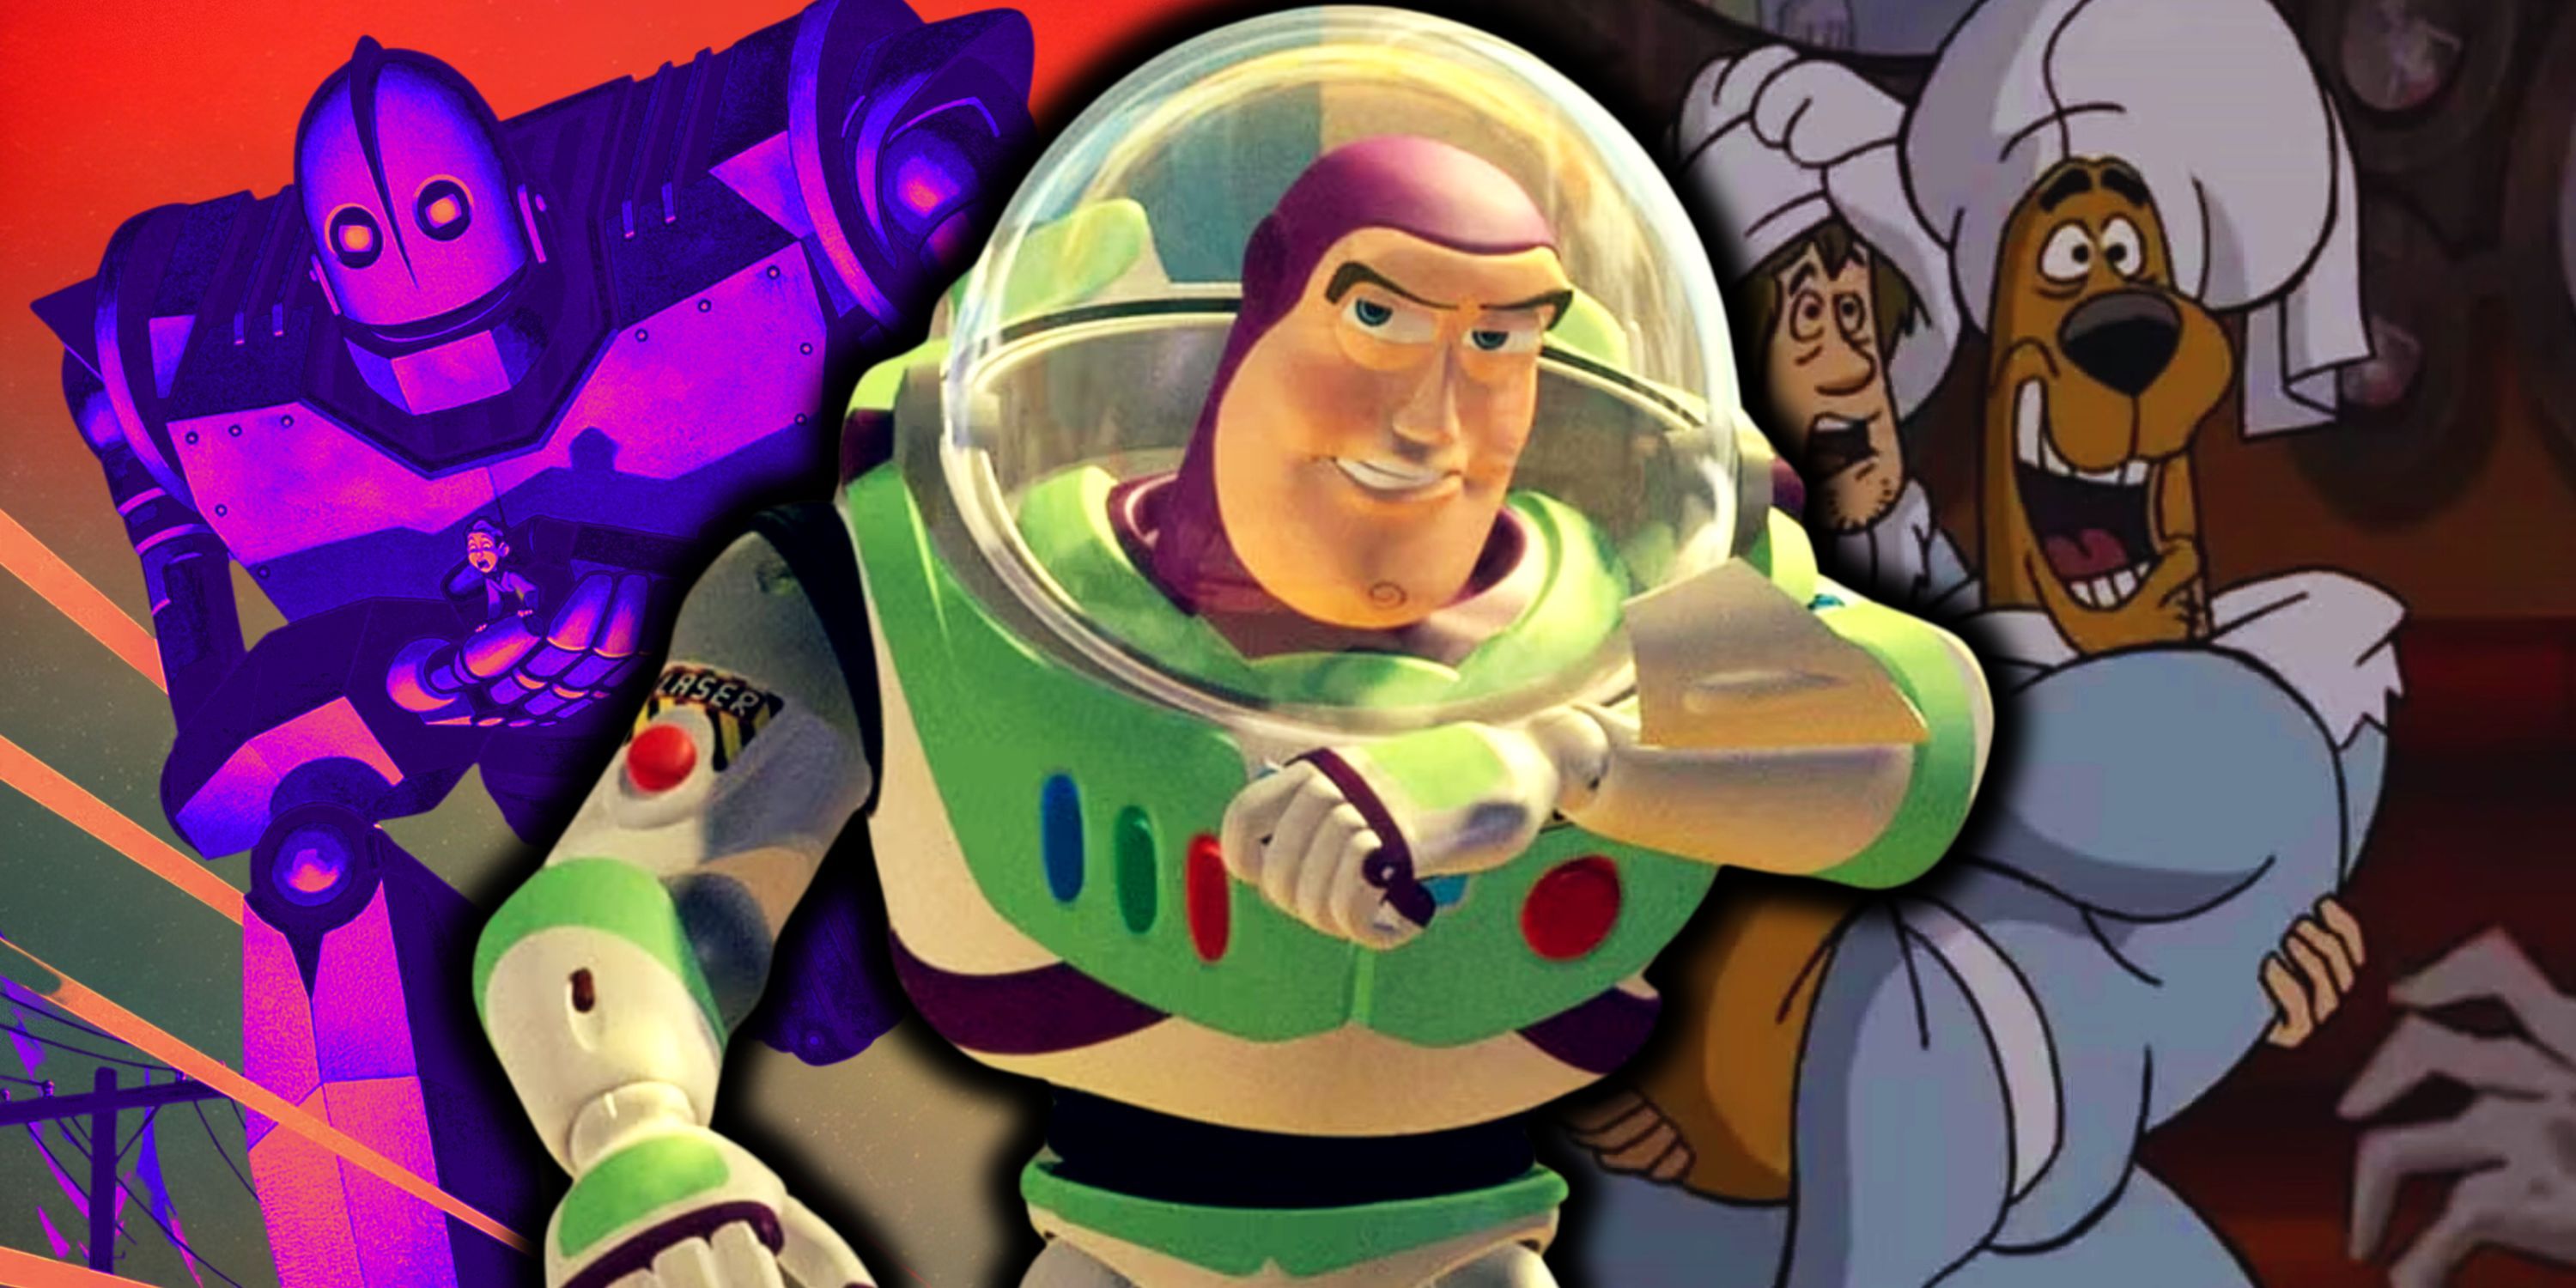 Composite image The Iron Giant, Buzz Lightyear, Scooby-Doo and Shaggy Rogers